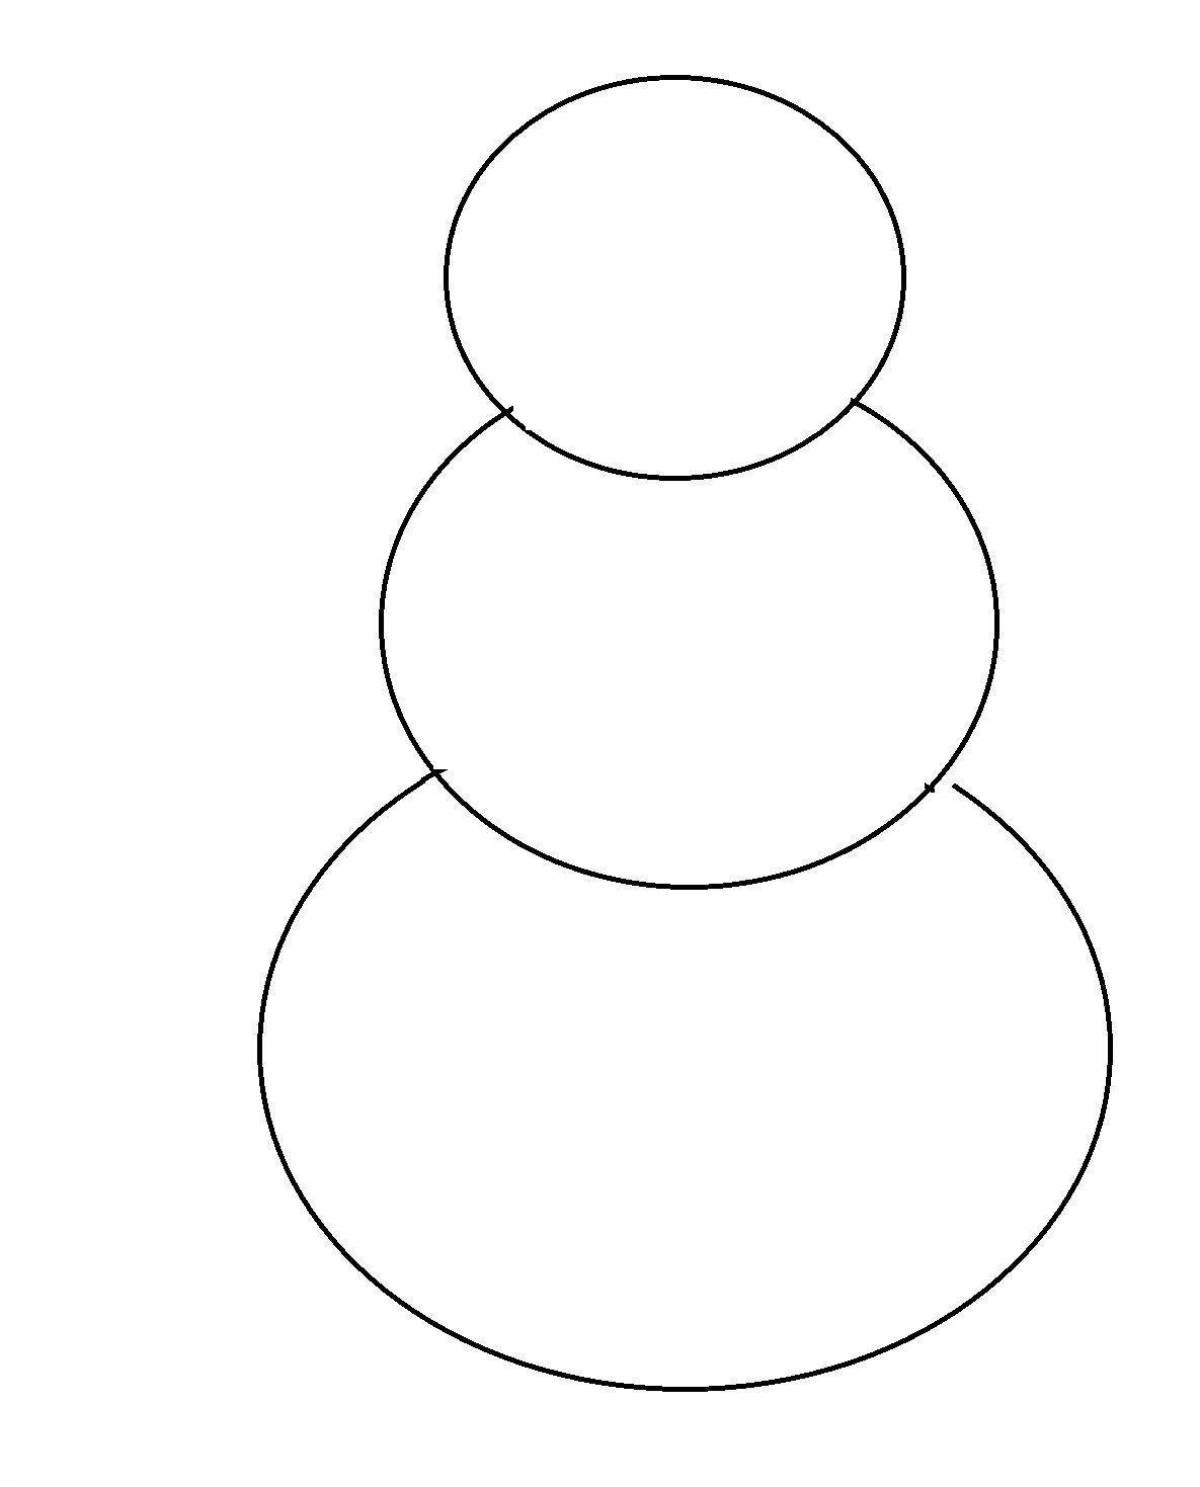 Sparkling coloring snowman without a nose